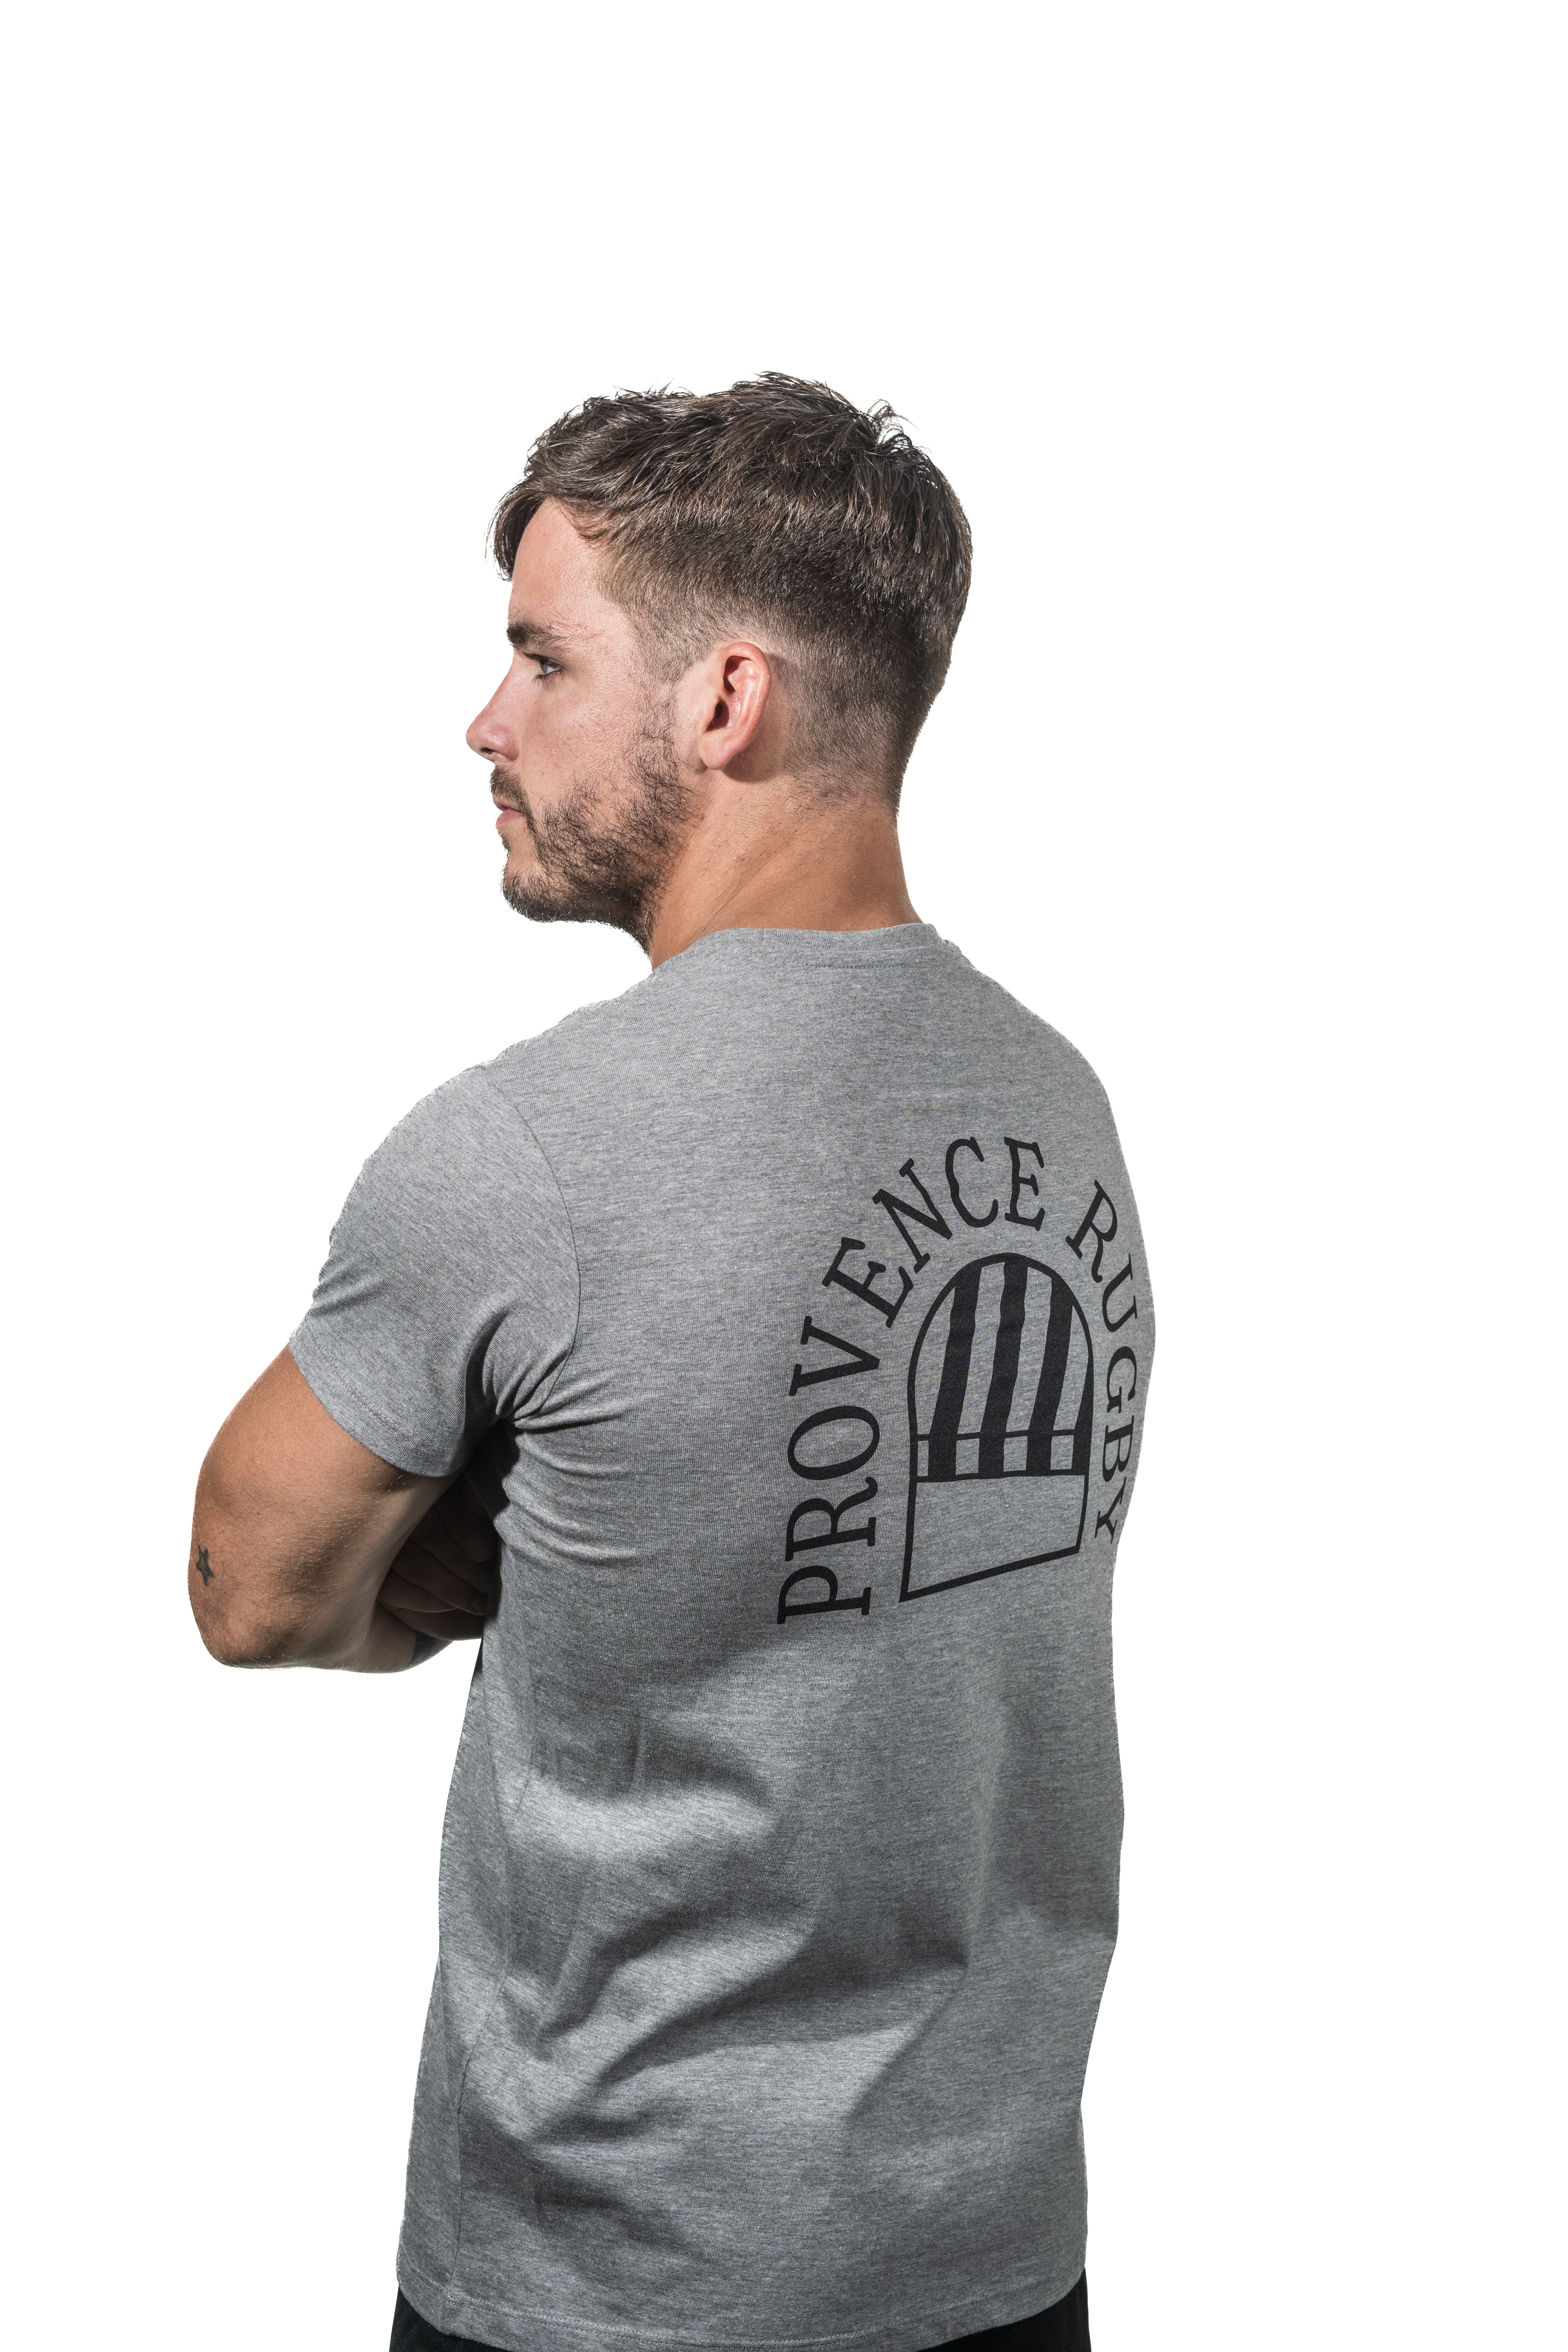 T-Shirt gris parasol Homme | Provence Rugby